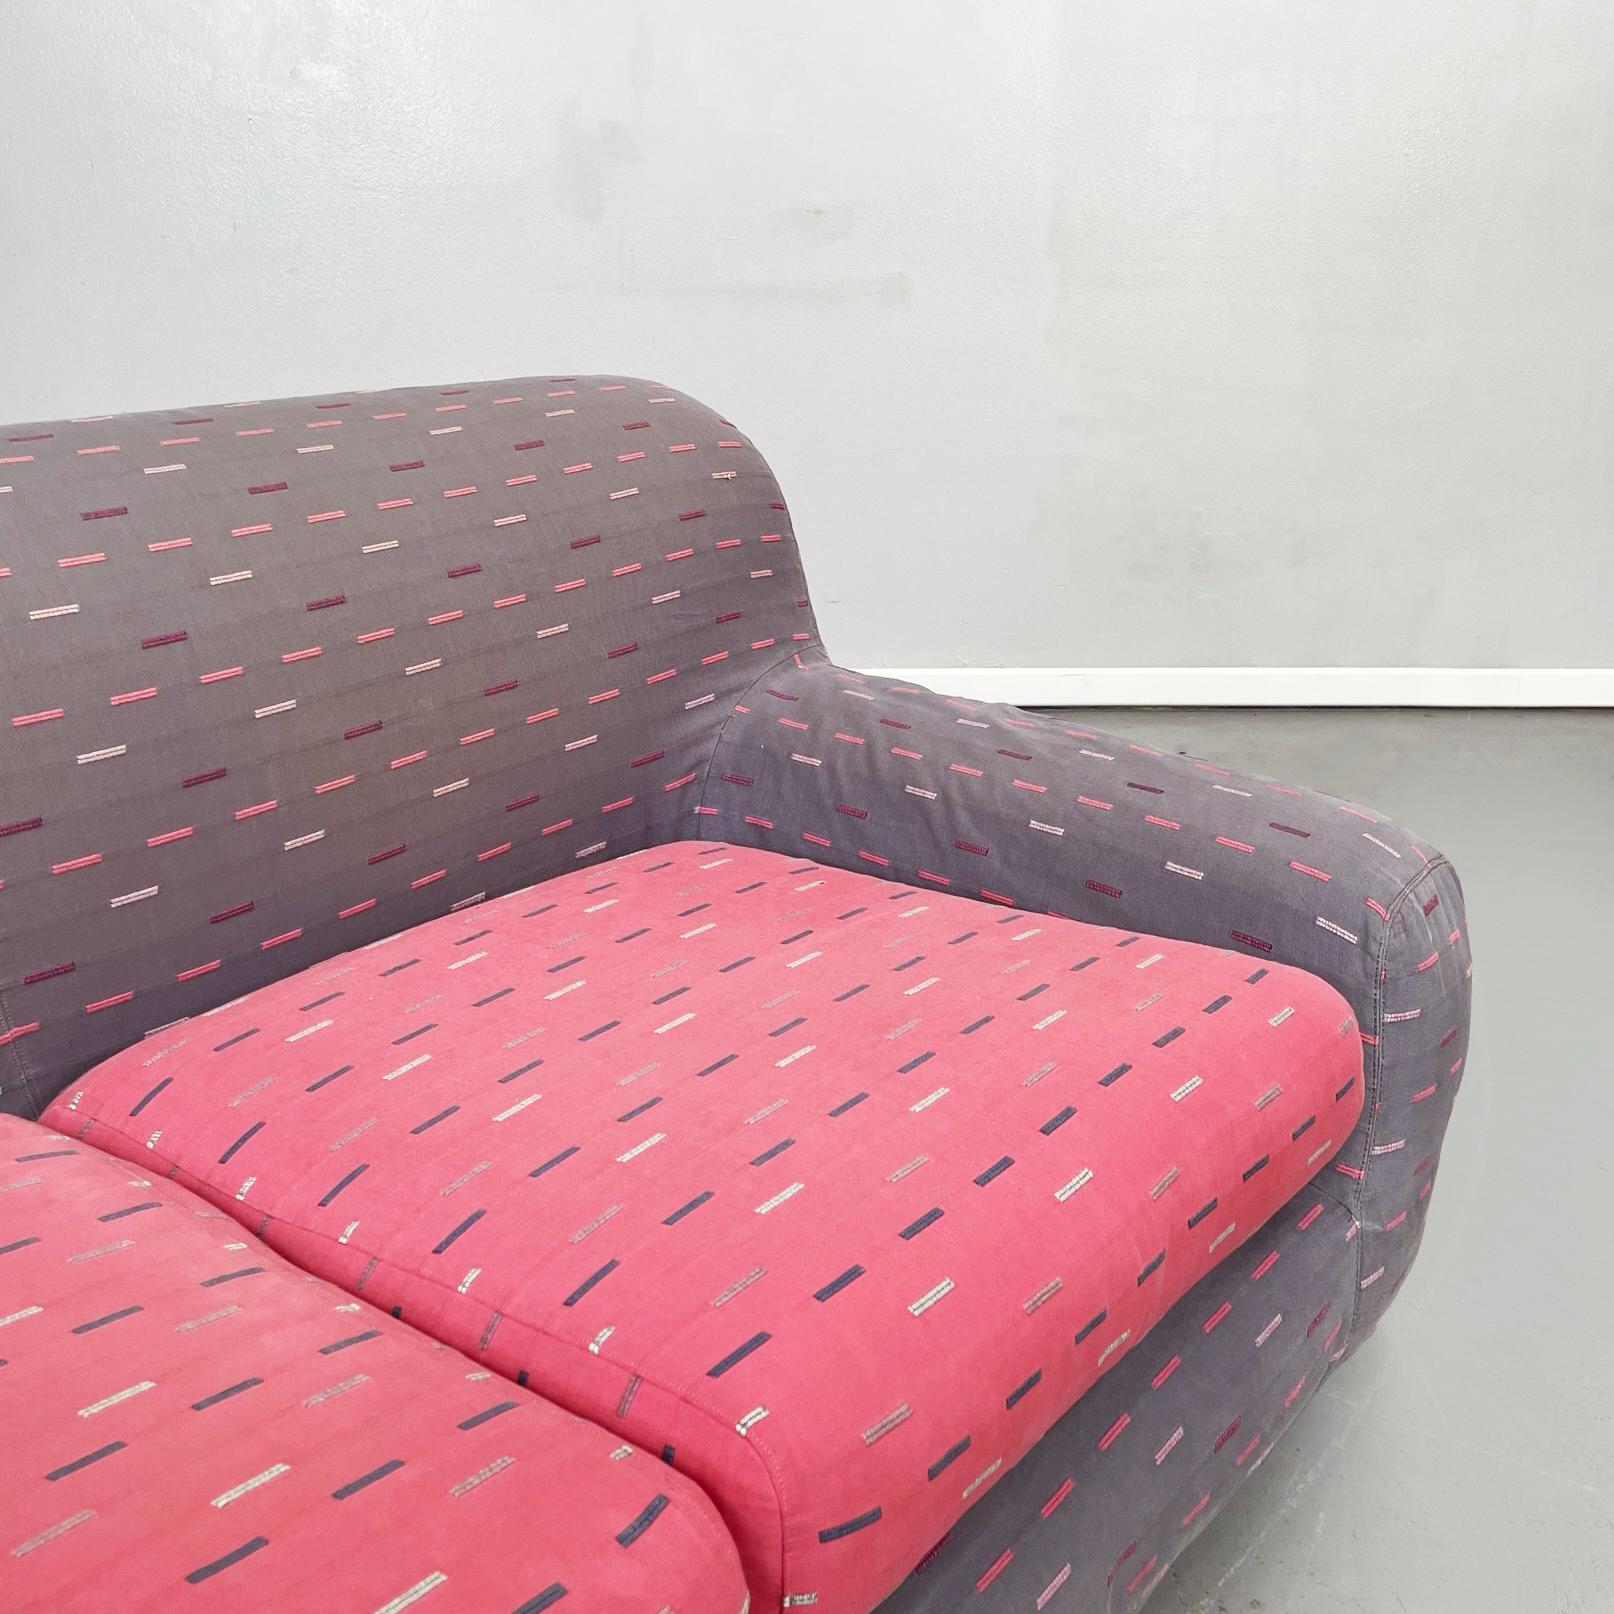 Late 20th Century Italian Mid-Century Pink and Grey Fabric Sofa Giubba by Cuneo for Arflex, 1980s For Sale